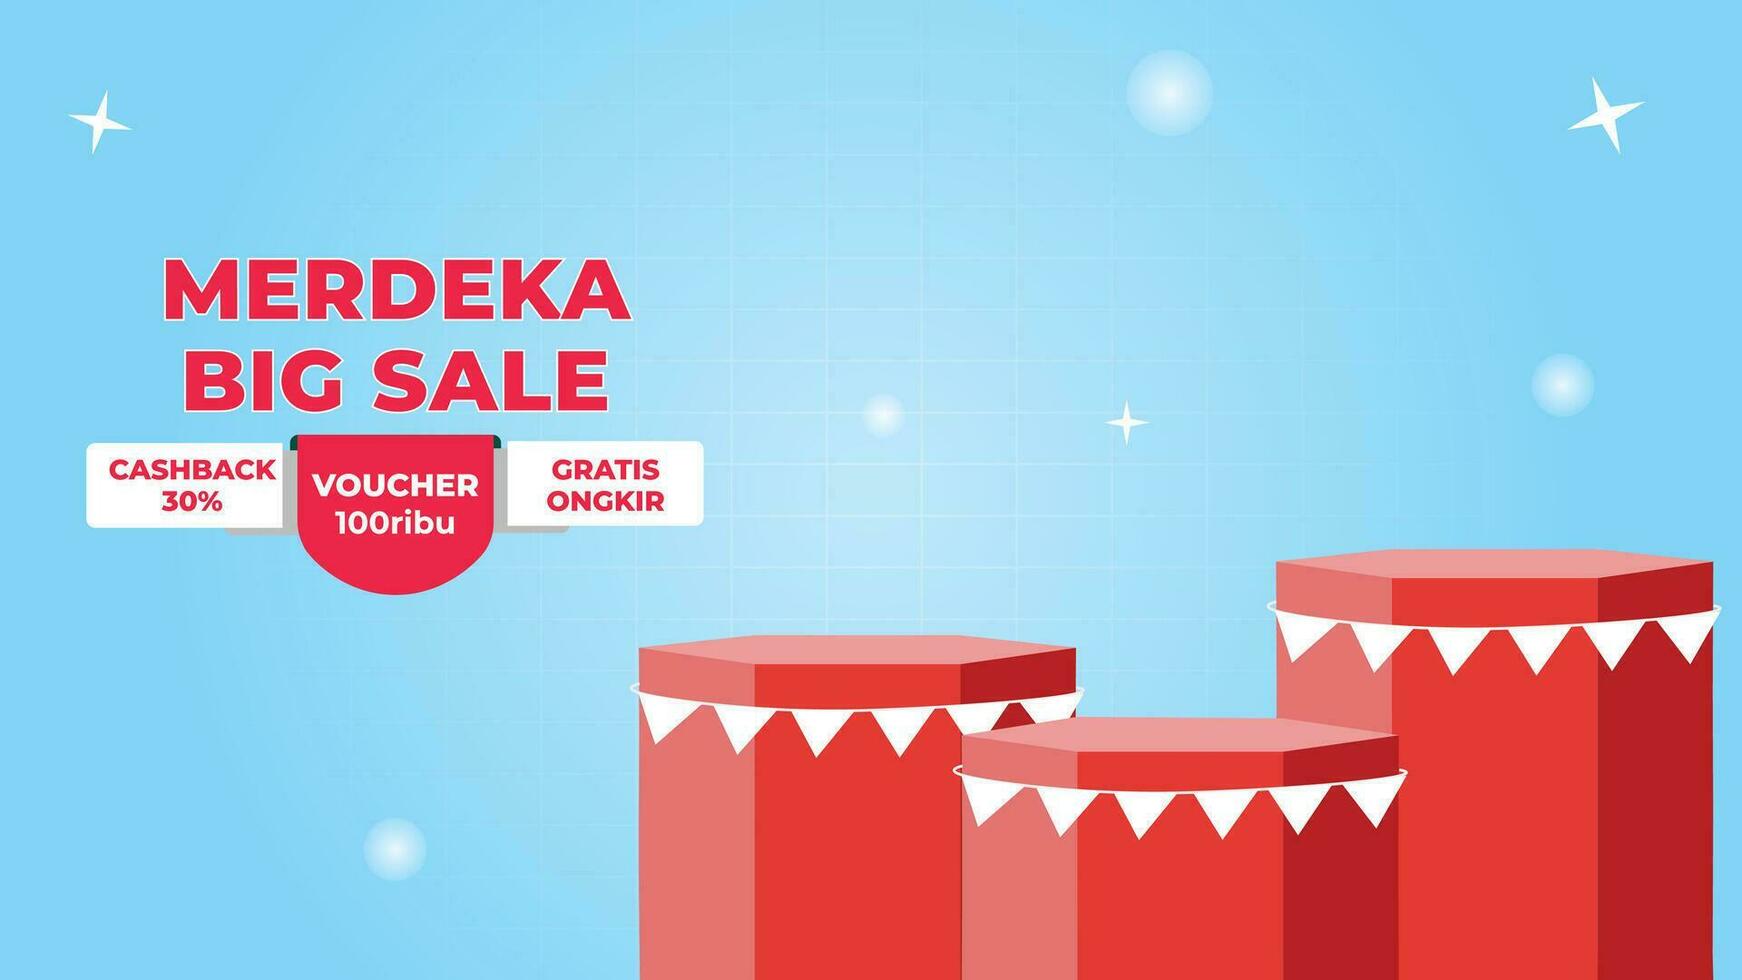 Dirgahayu indonesia merdeka 17 agustus promo banner template with blank product podium and flags vector